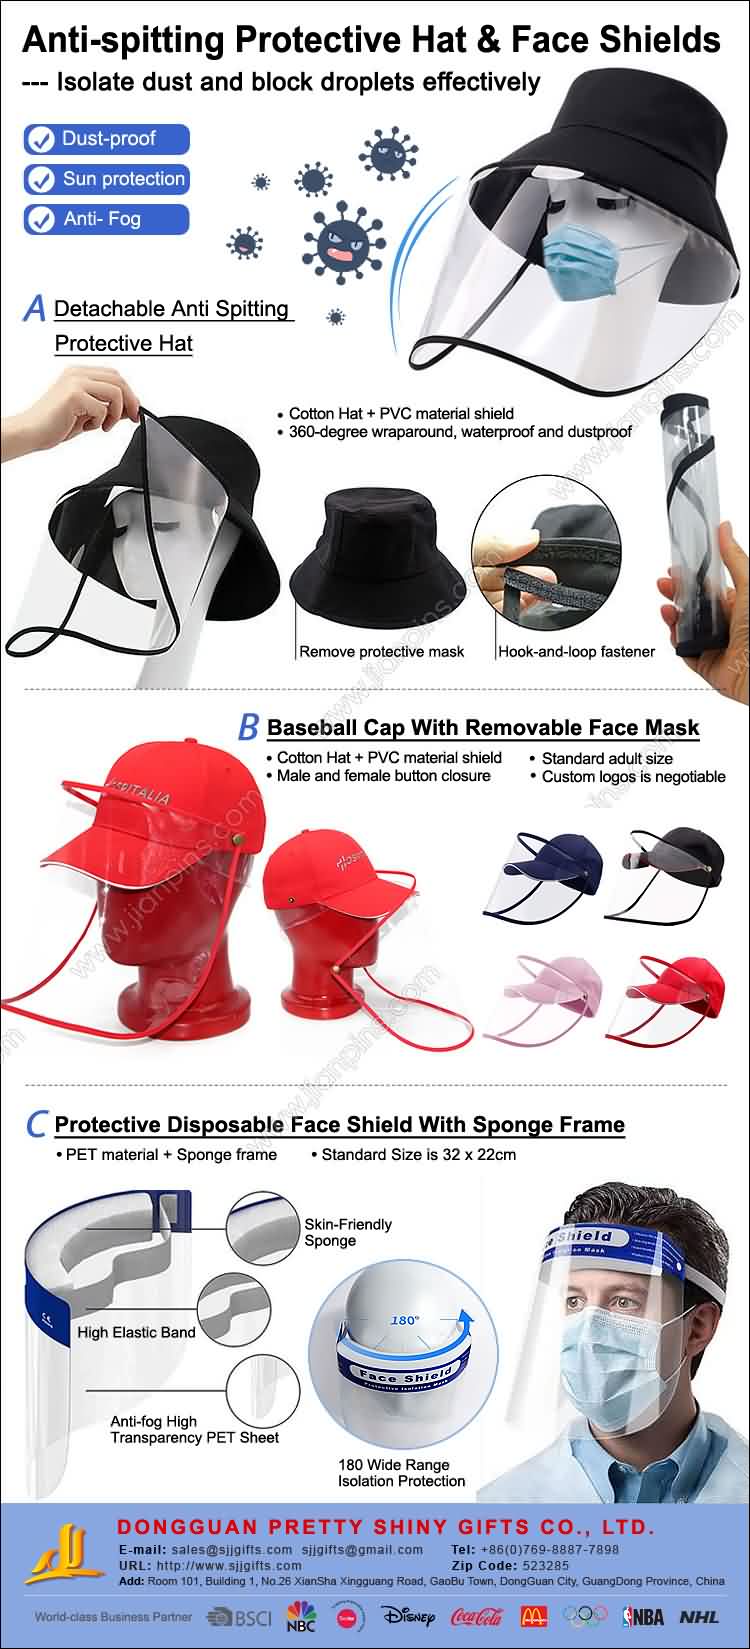 Anti-spitting Protective Hat & Face Shields